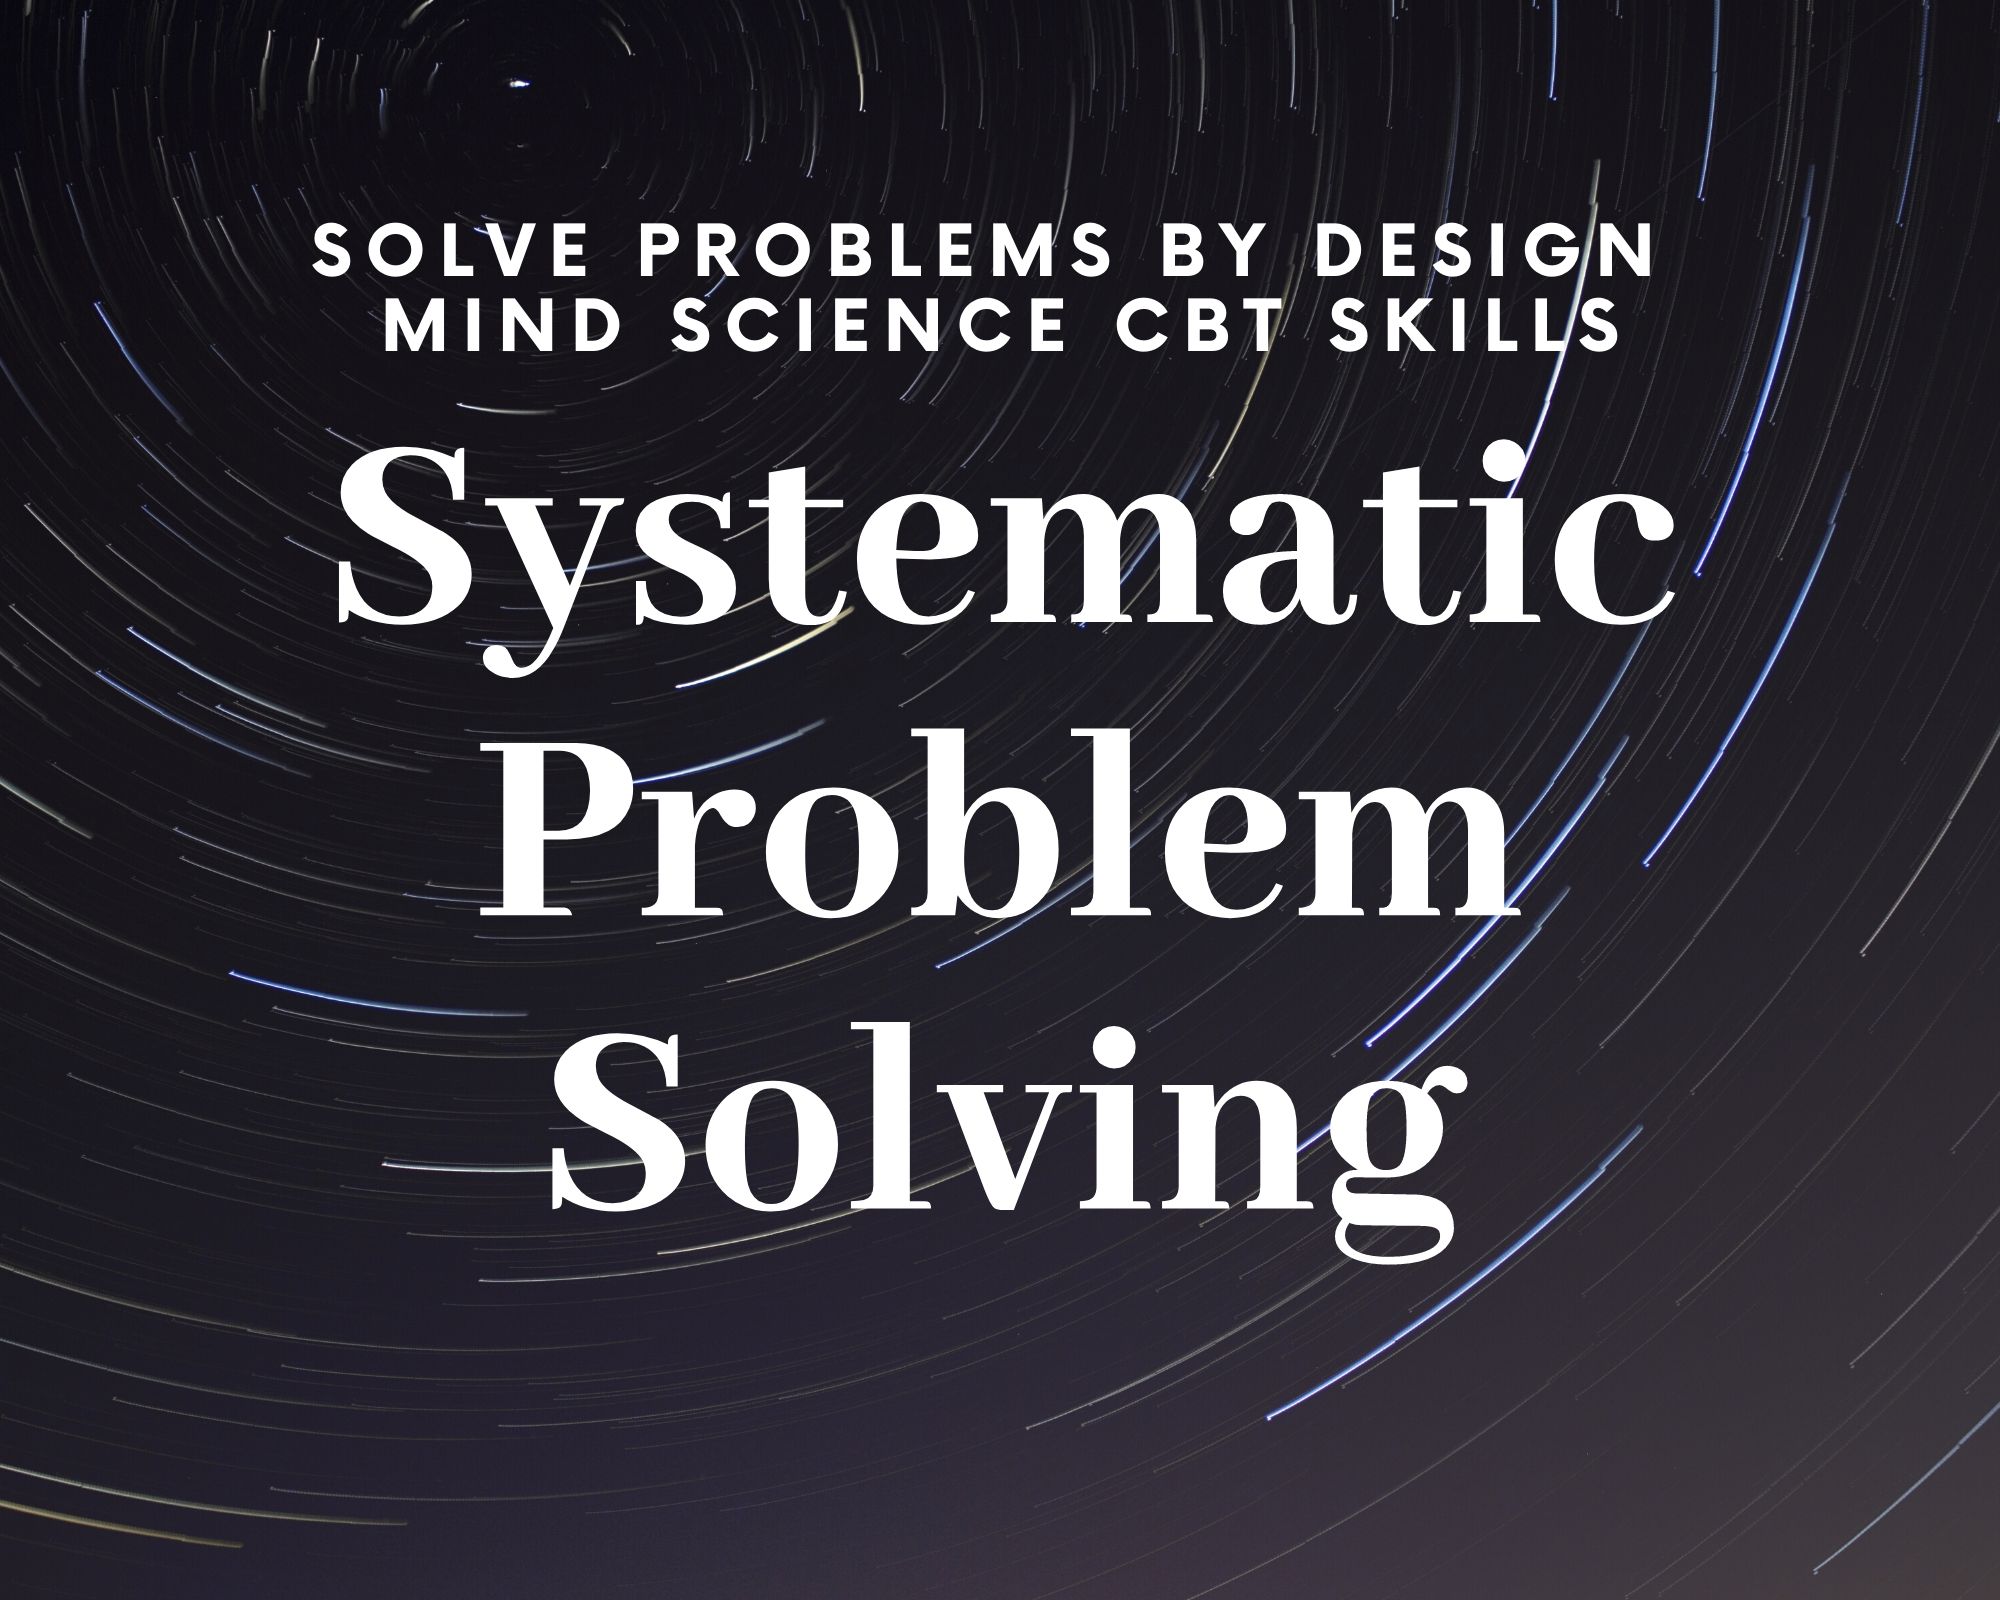 a systematic approach to problem solving used by all scientists